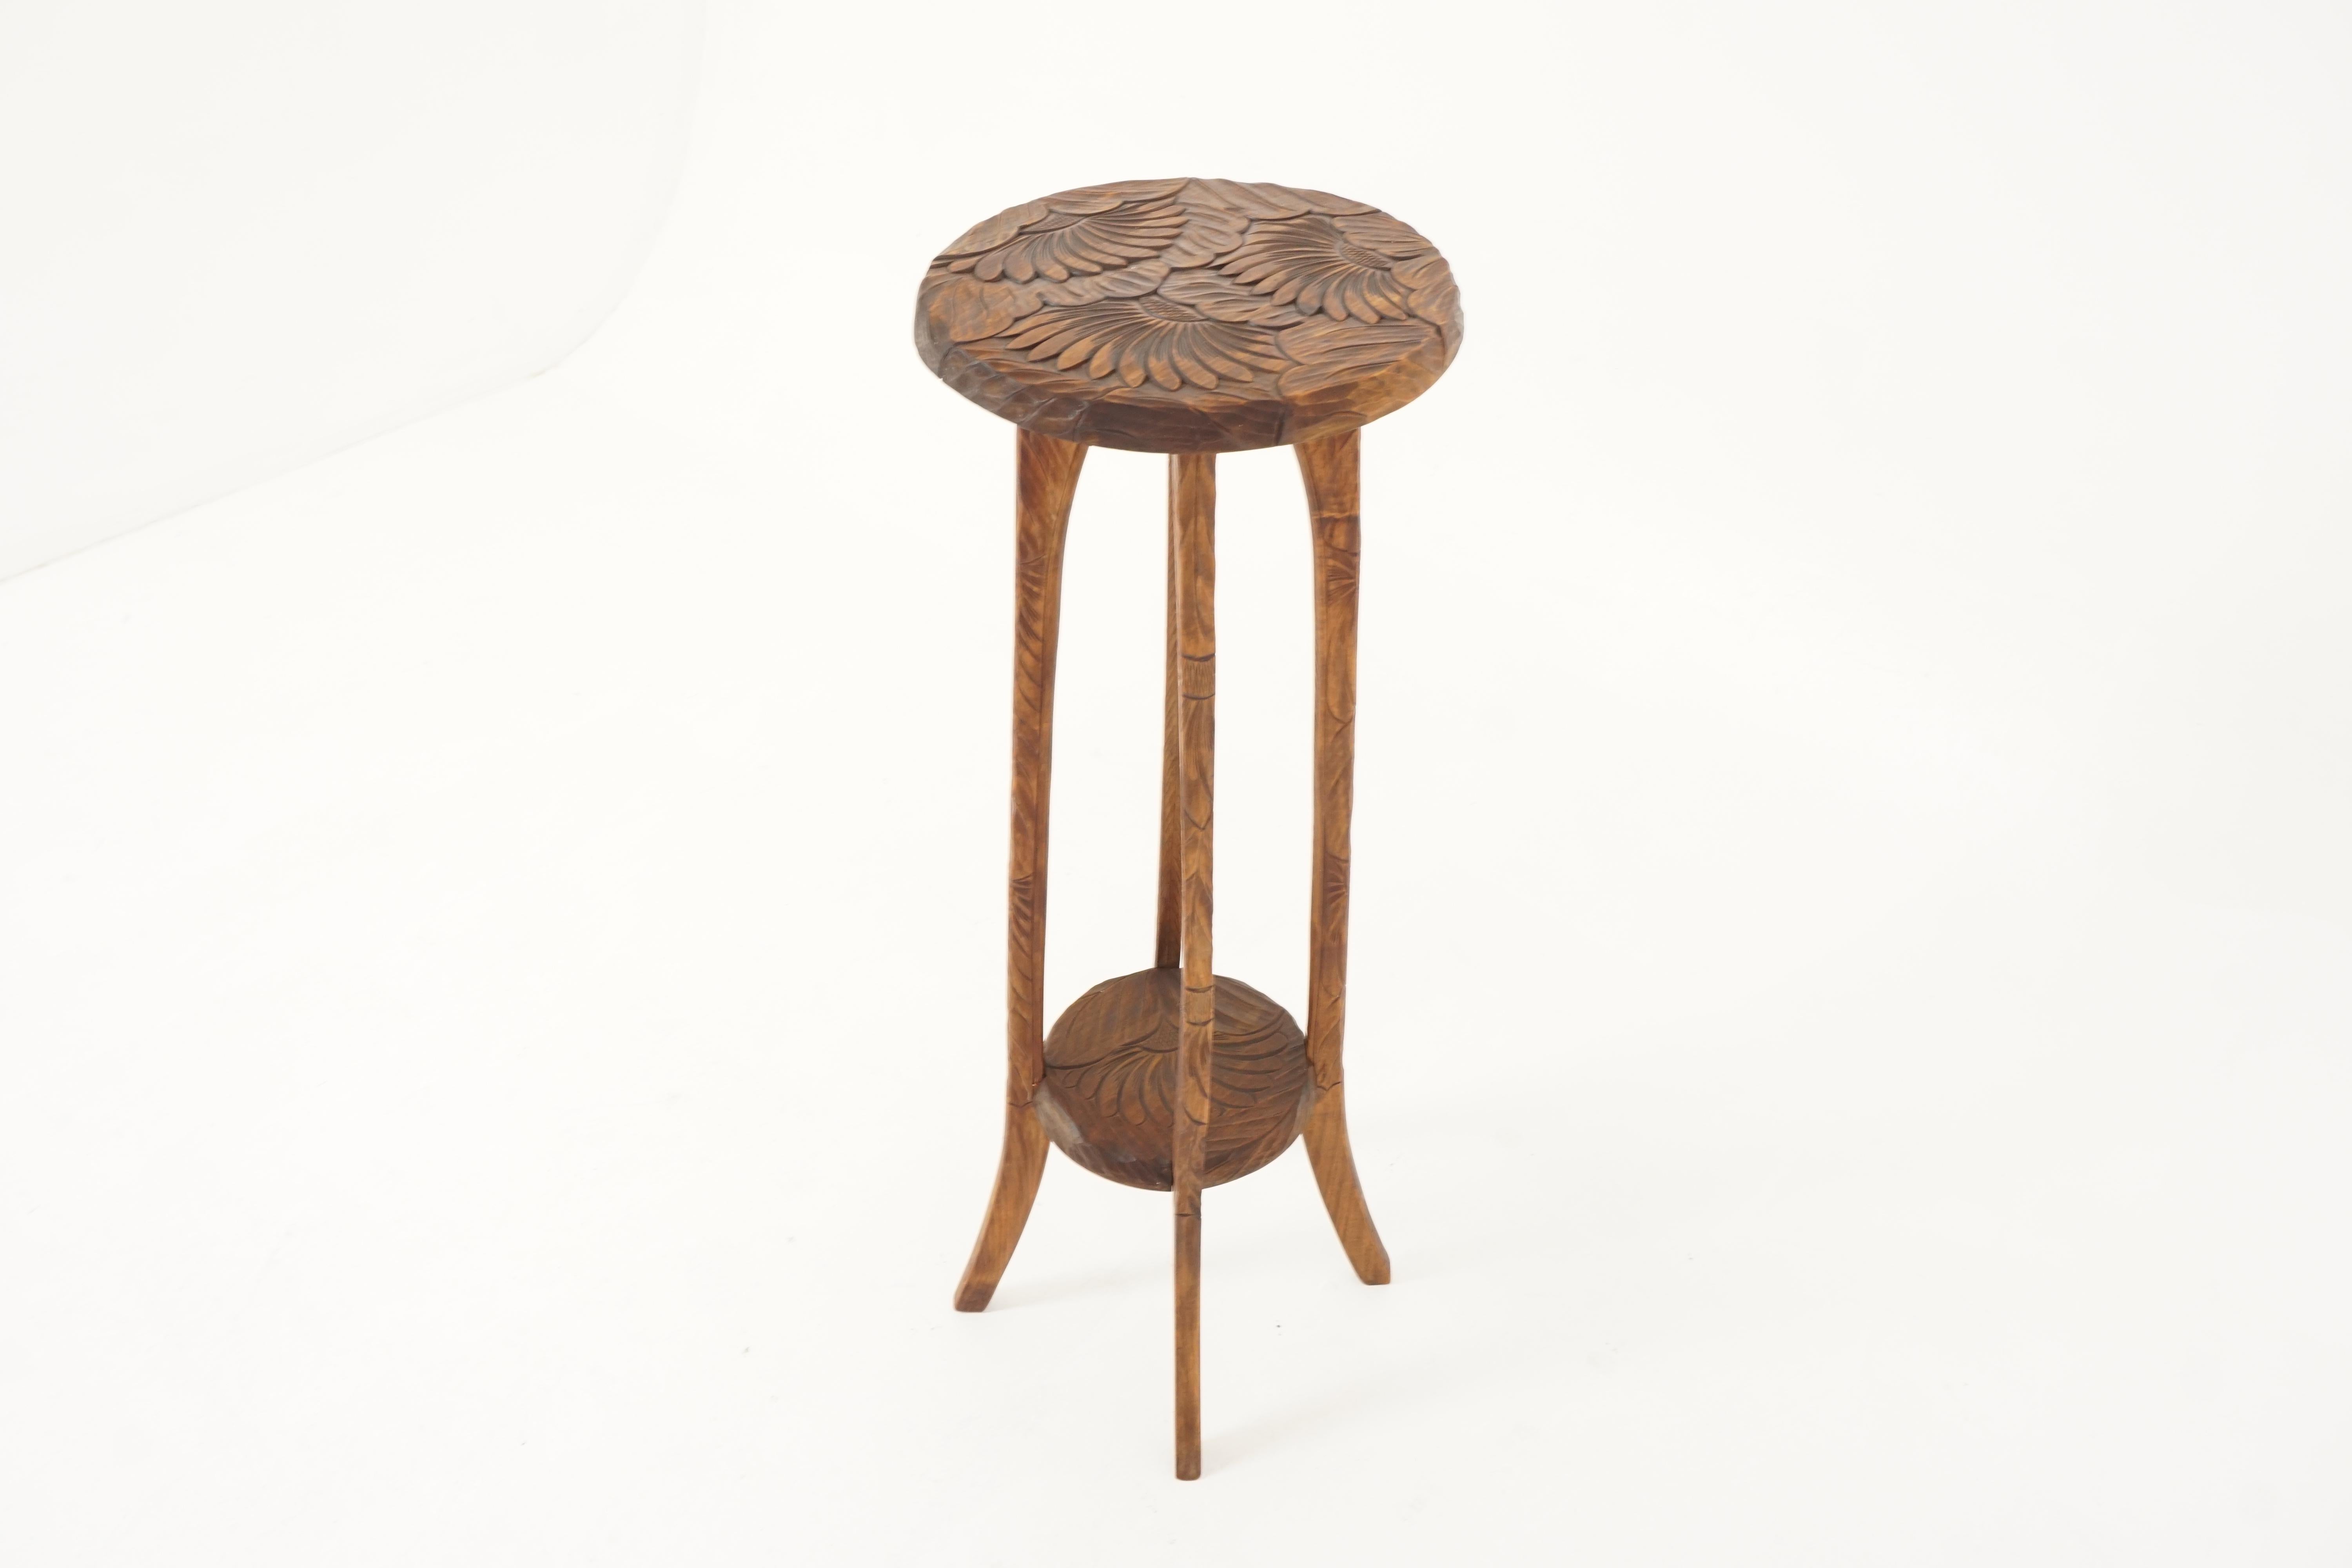 Japanese Antique Tall Plant Stand, Liberty's London, Carved Mahogany, Japan, 1905